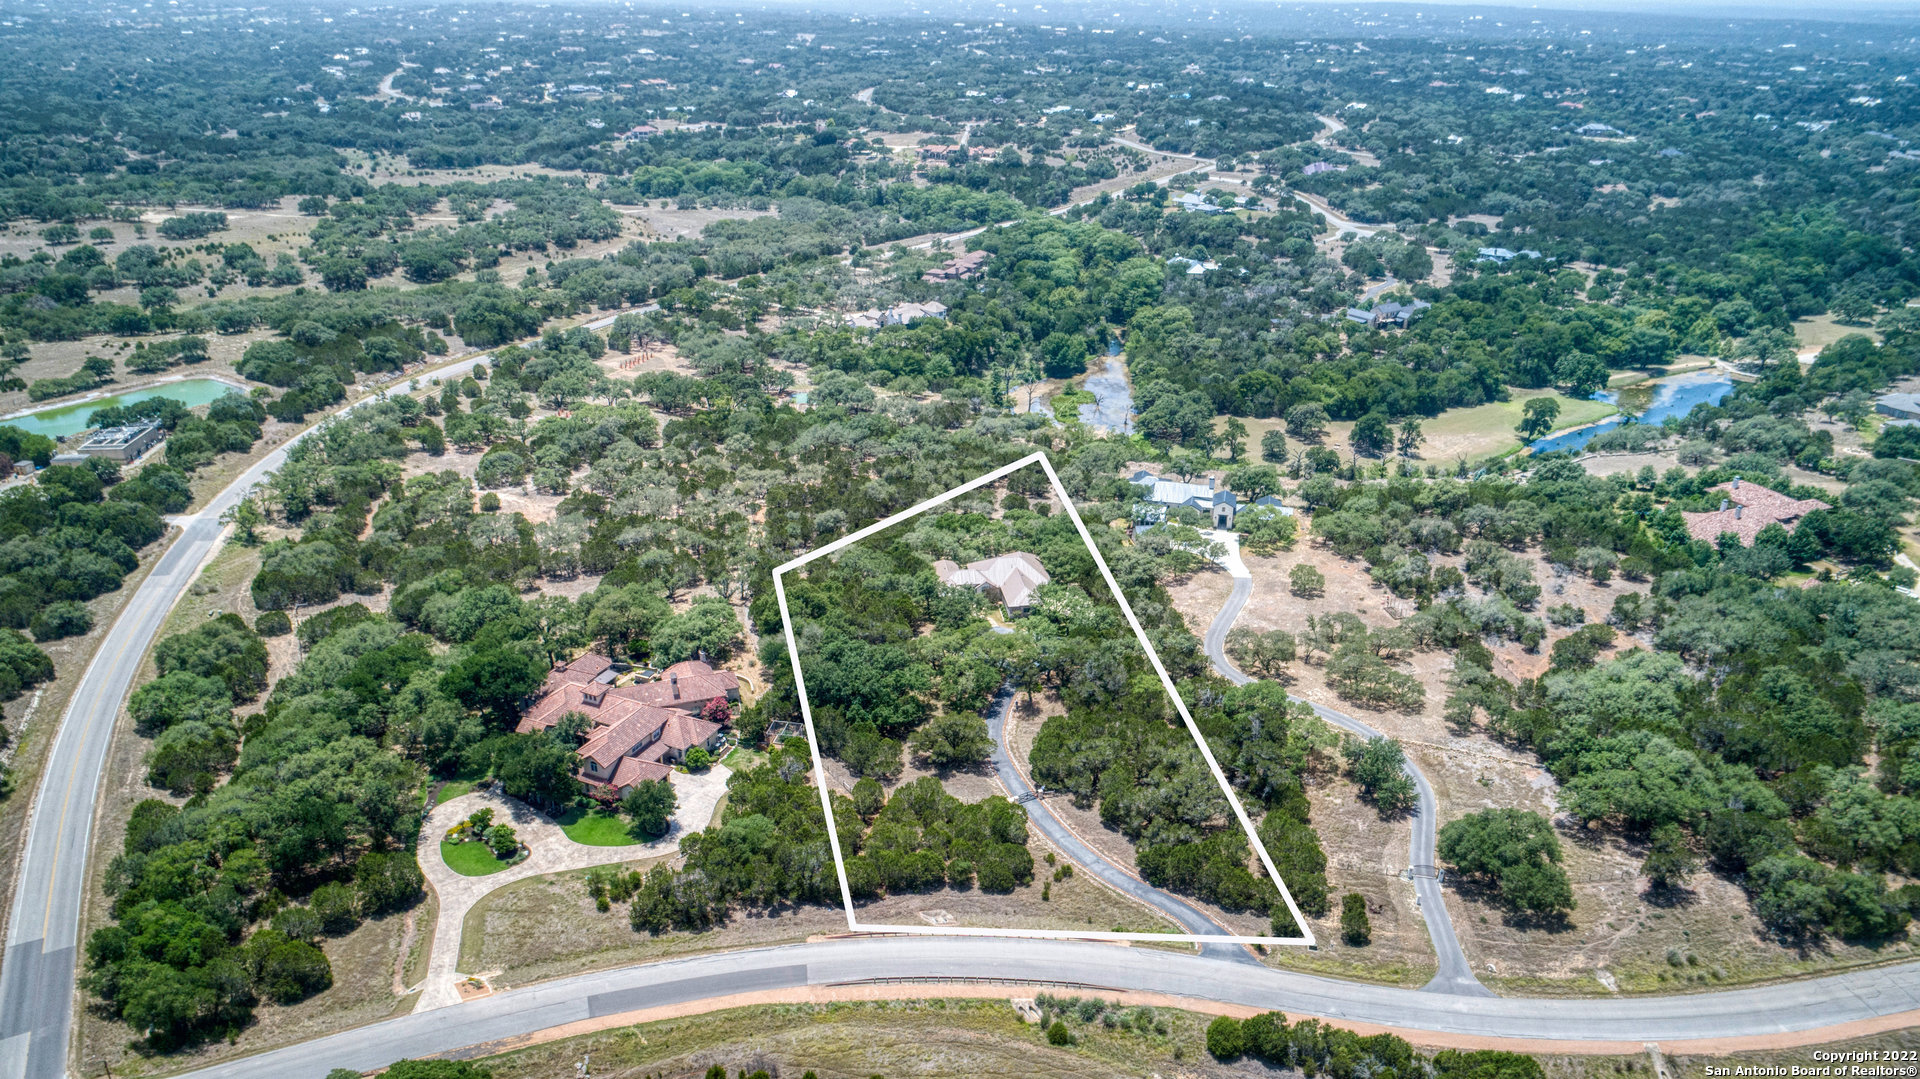 Stunning custom home on 3+ secluded acres in the Texas Hill Country's most exclusive country club community, Cordillera Ranch. Hill Country views of Swede Lake and Swede Creek Park characterize this premium location which features cul-de-sac privacy and multiple mature oak trees. This home is just a short walk to 66 acre Swede Creek Park and Cordillera's private Guadalupe River frontage. The open floor plan features granite counters, stainless Bosch appliances, custom cabinets and native stone accents. A spacious summer kitchen and covered outdoor living space created the ideal venue for family gatherings and entertaining guests. This home also features central water, sewer and high-speed fiber optic service.